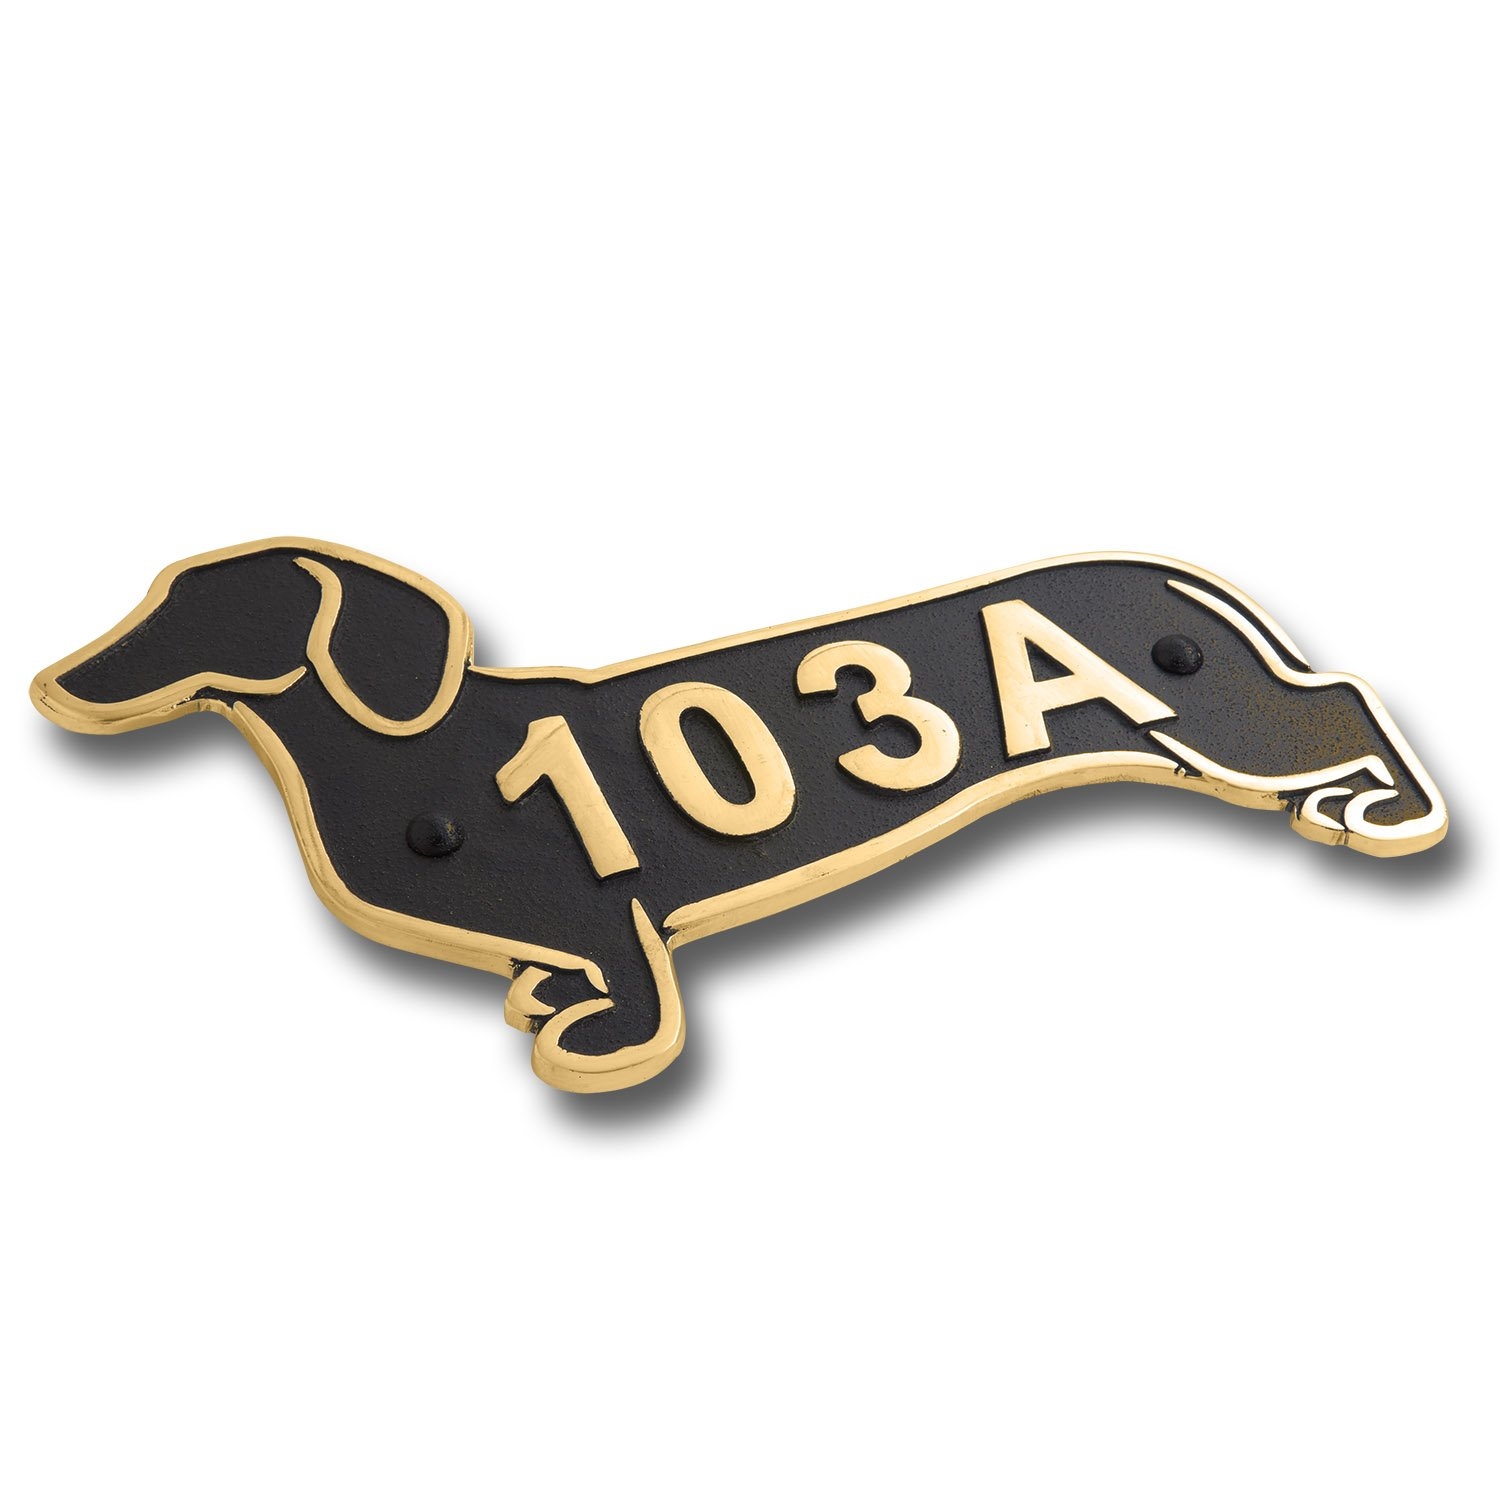 Dachshund Metal House Number Address Plaque. Sausage Dog Gift Idea For A Dachshund Owner. Yard Or Garden Dachshund Décor Makes A Great Gift For Him Or Her – Aluminium & Grey